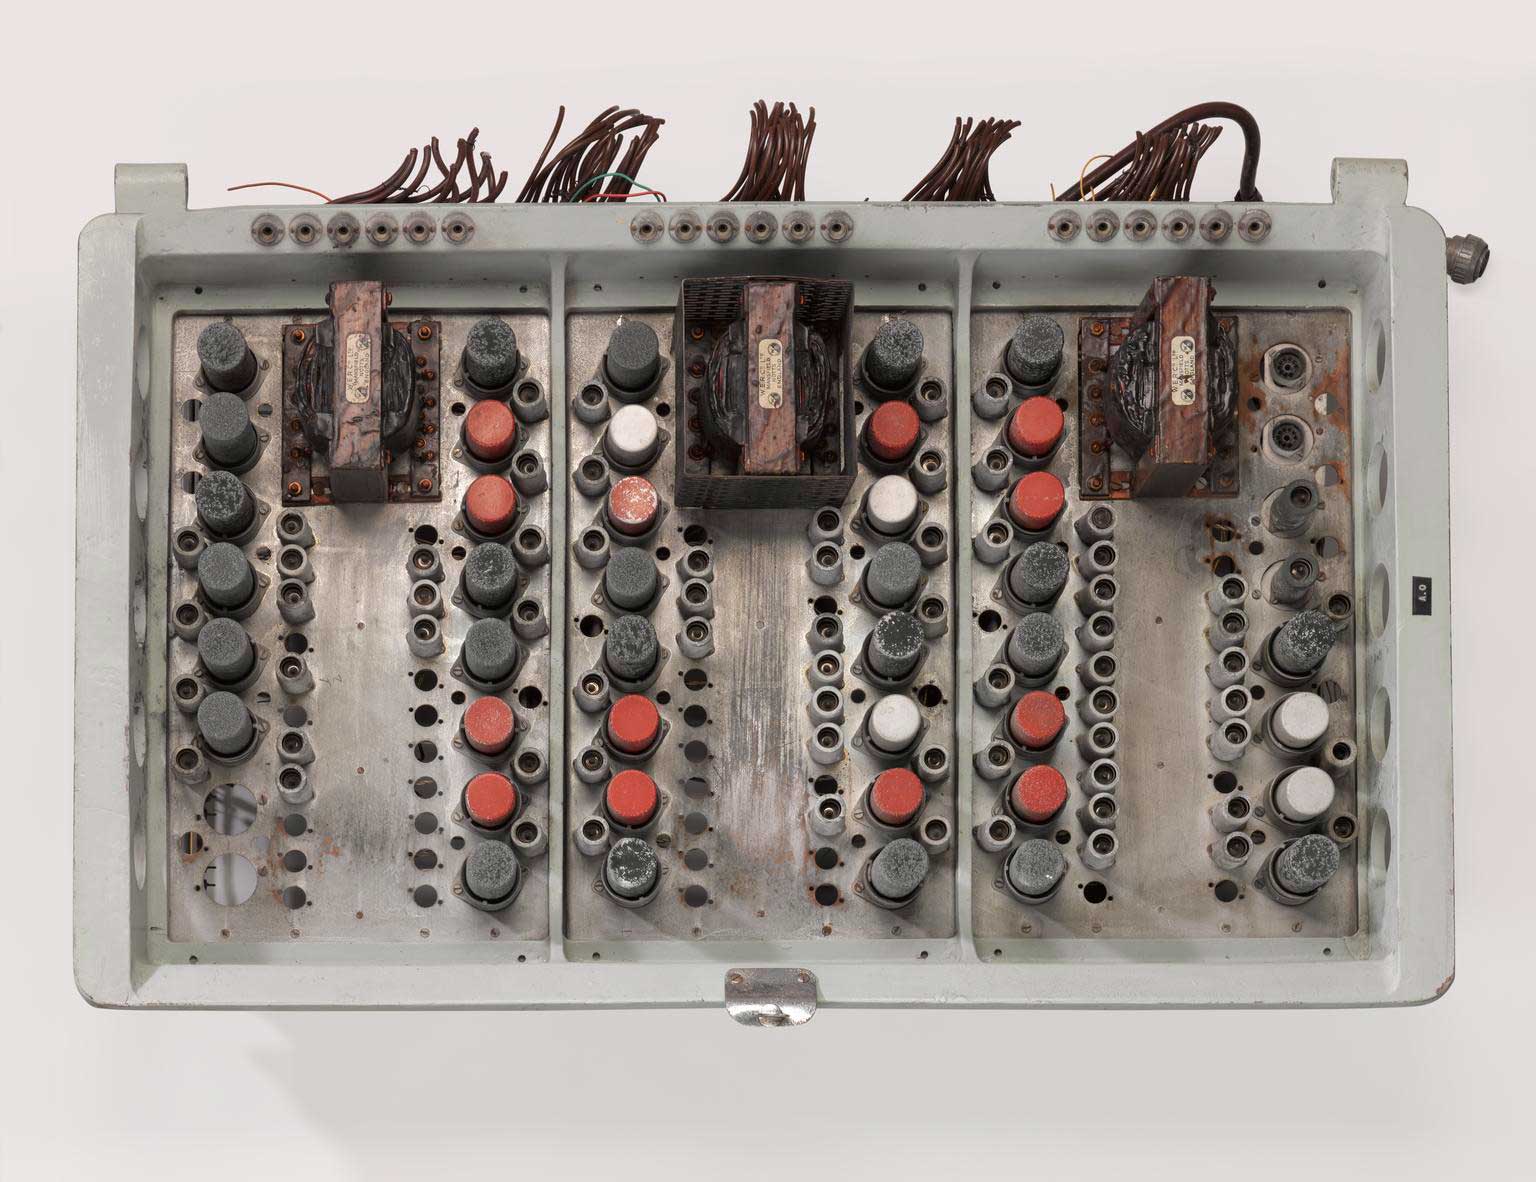 A component part of an early computer